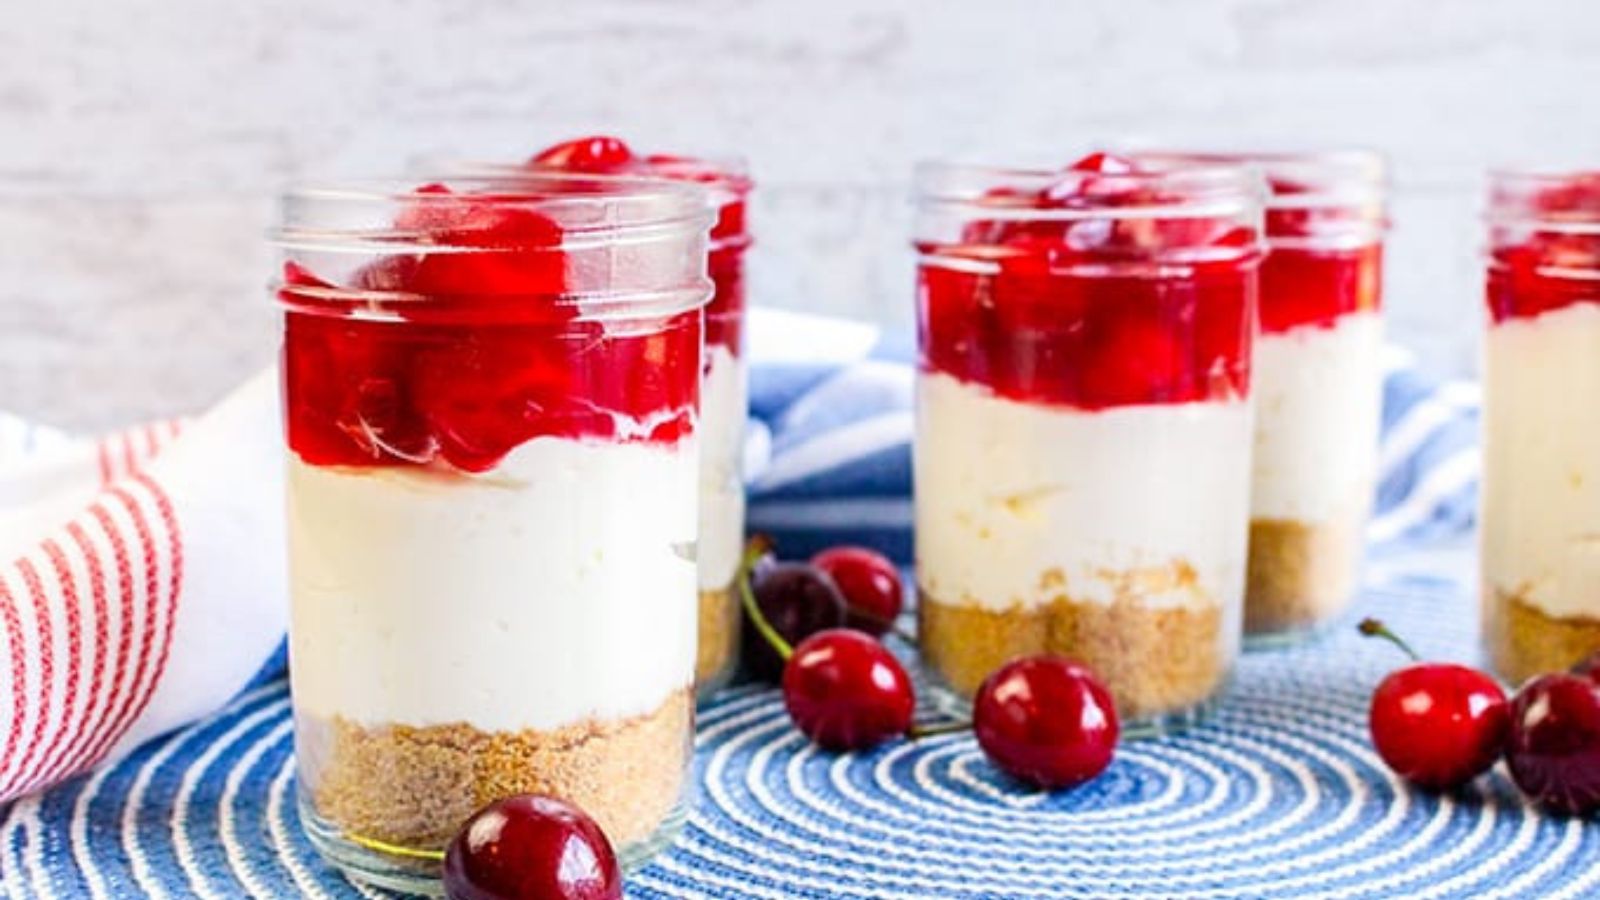 Discover 18 Effortless No-Bake Desserts You Can Master at Home